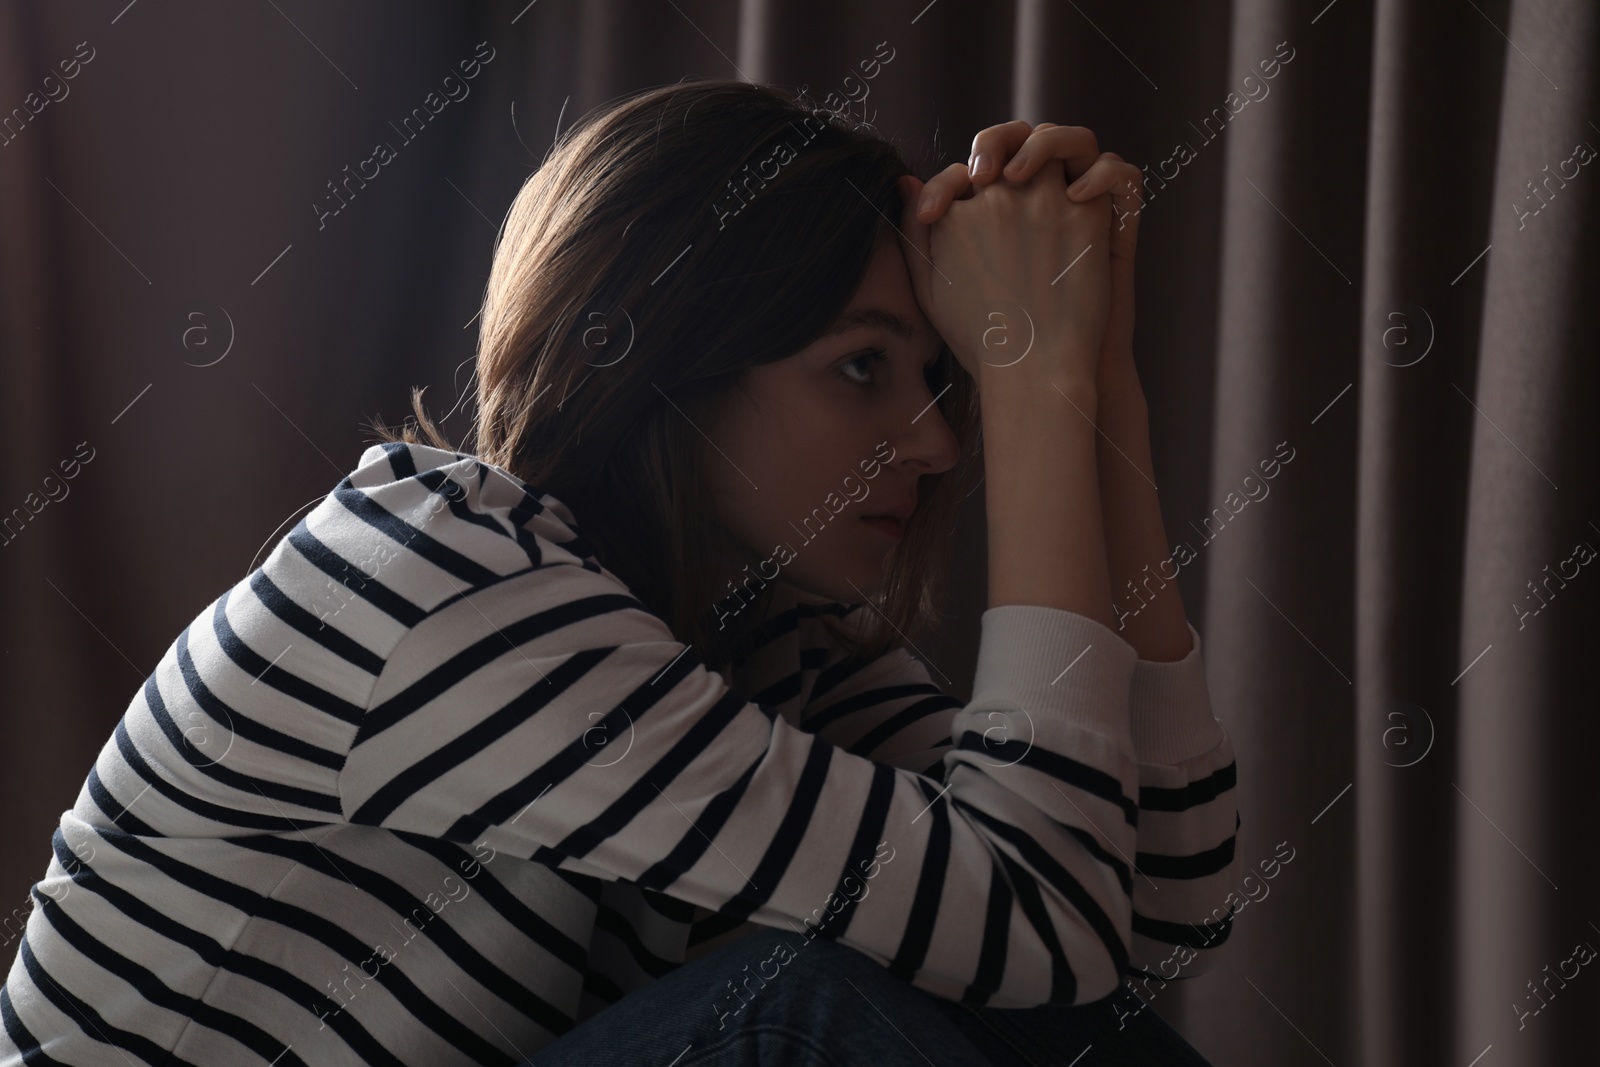 Photo of Sad young woman near closed curtains indoors